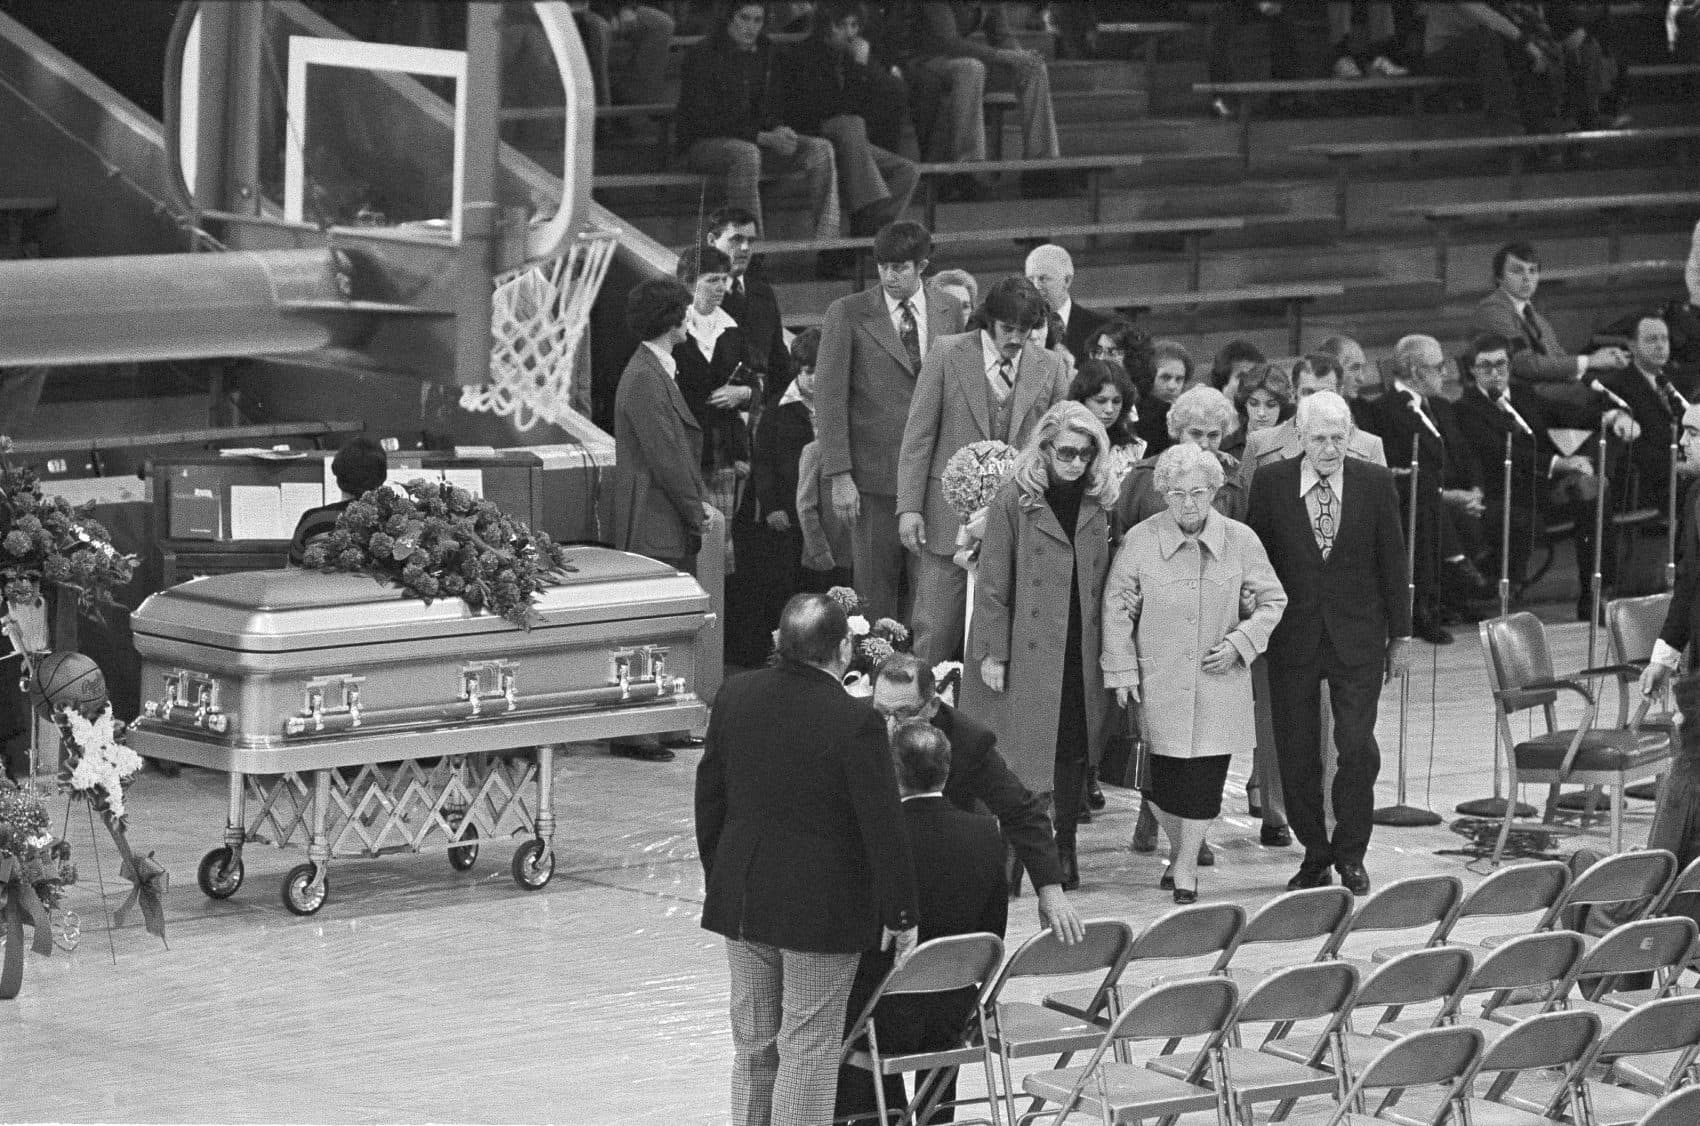 The family members of University of Evansville basketball player Kevin Kingston pass his casket as they arrive at a memorial service for Kingston and Mike Duff at the Eldorado High School gym in Eldorado, Ill., Dec. 17, 1977. (Brian Horton/AP)